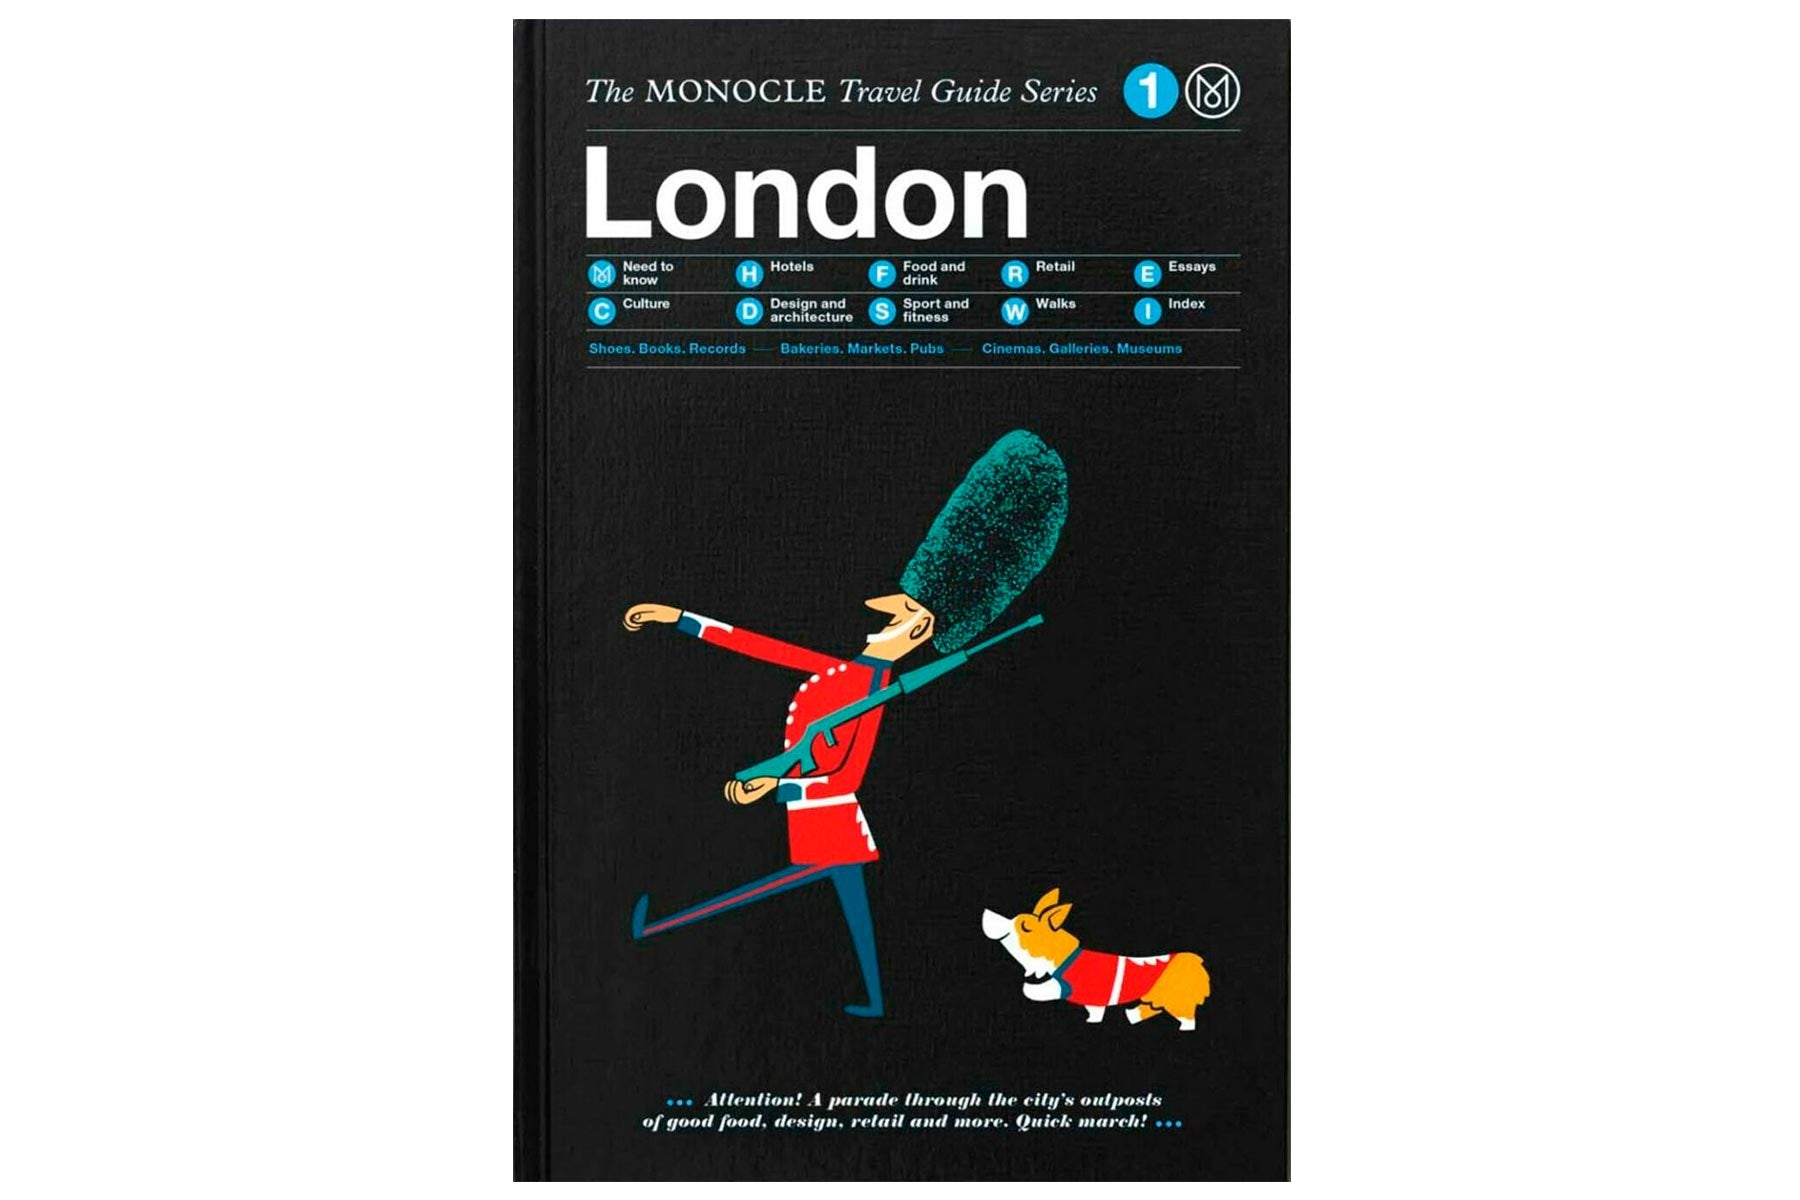 The Monocle Travel Guide London → Shoe Chapter